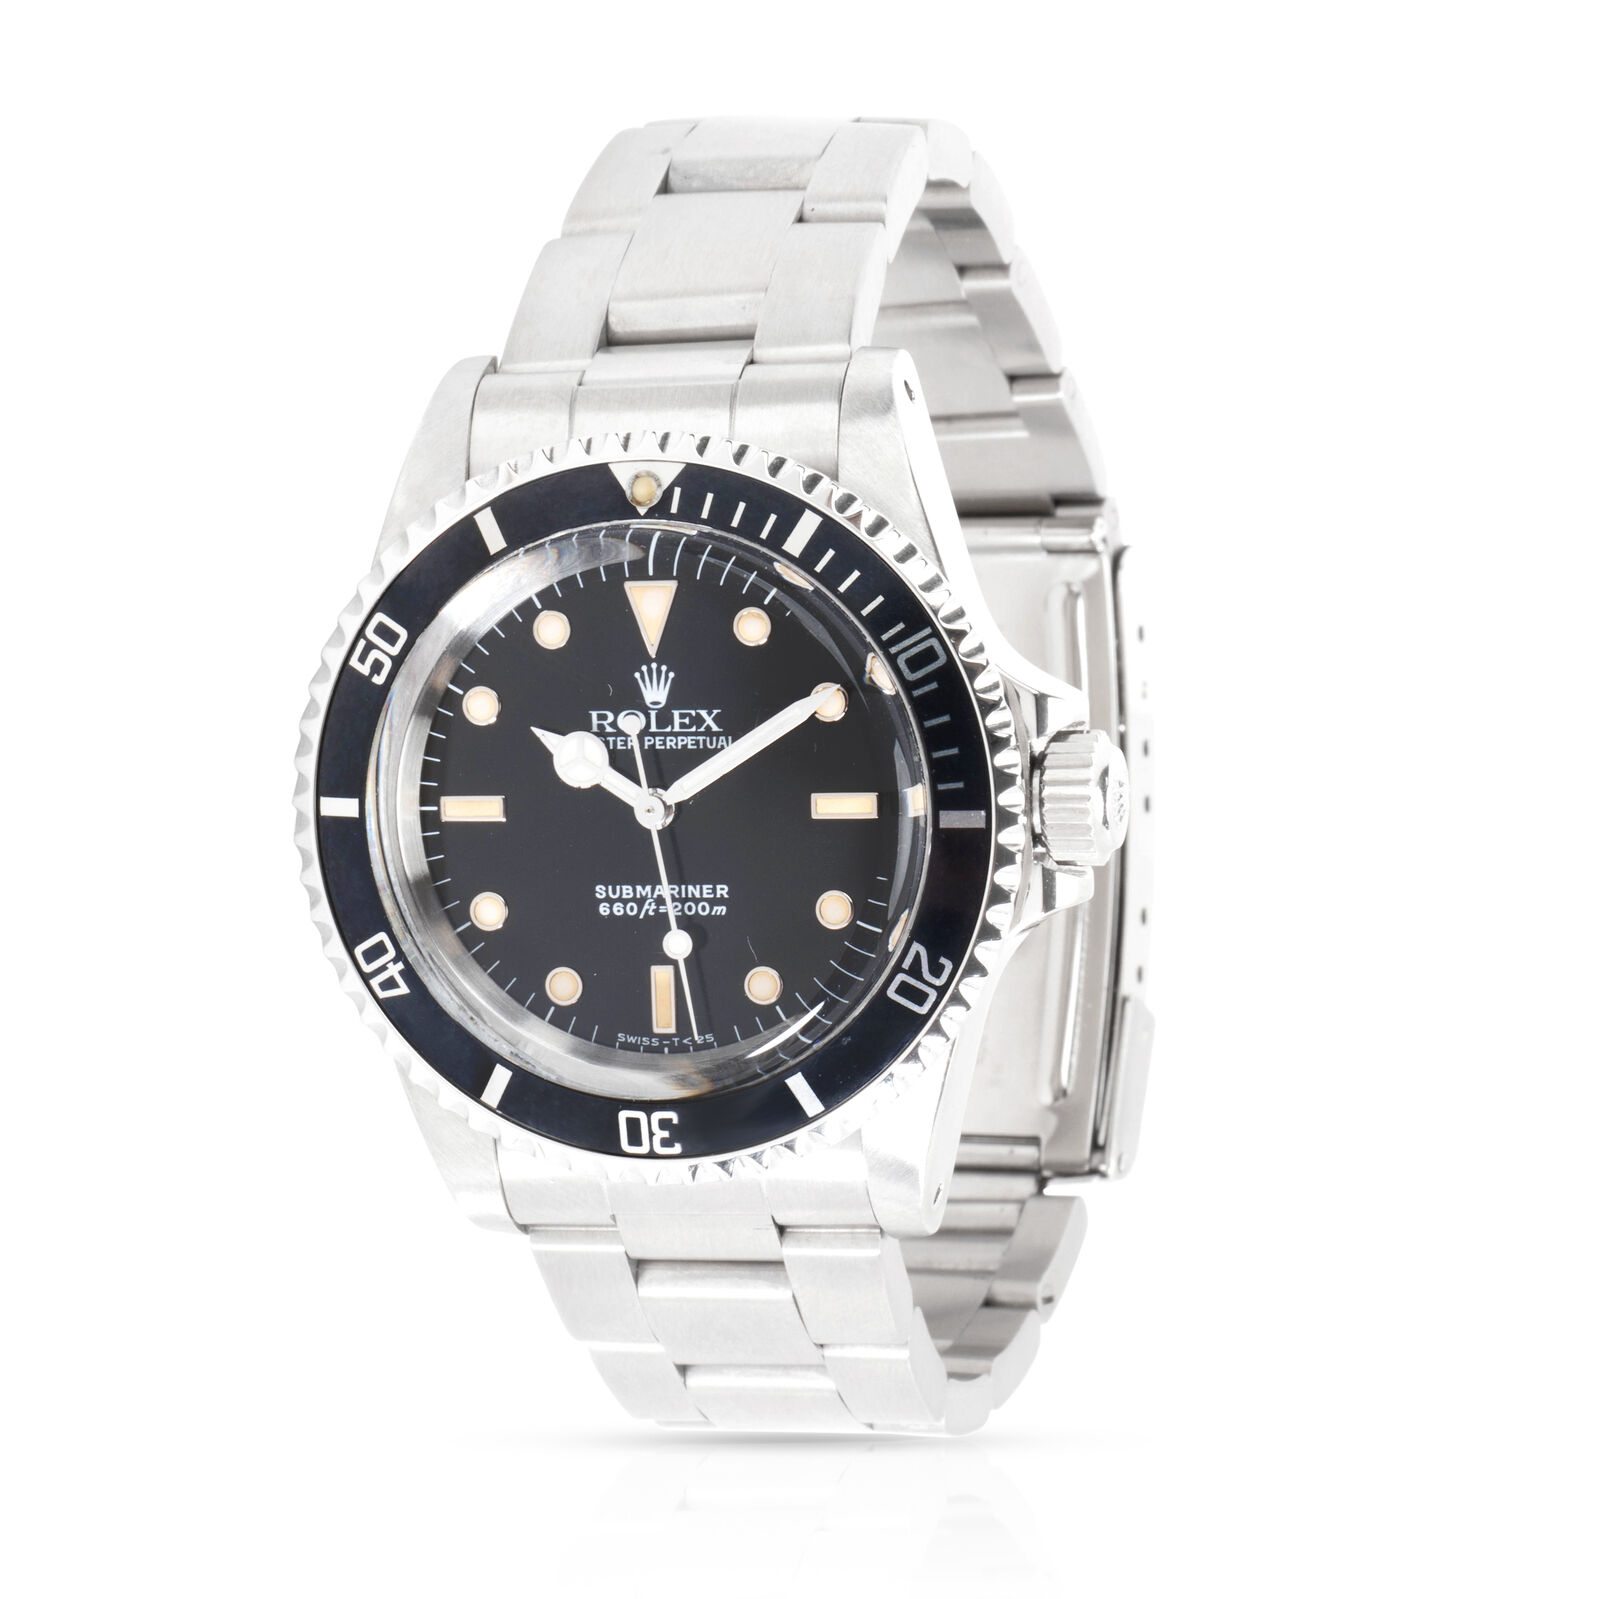 Image of Rolex Submariner 5513 Men's Watch in Stainless Steel